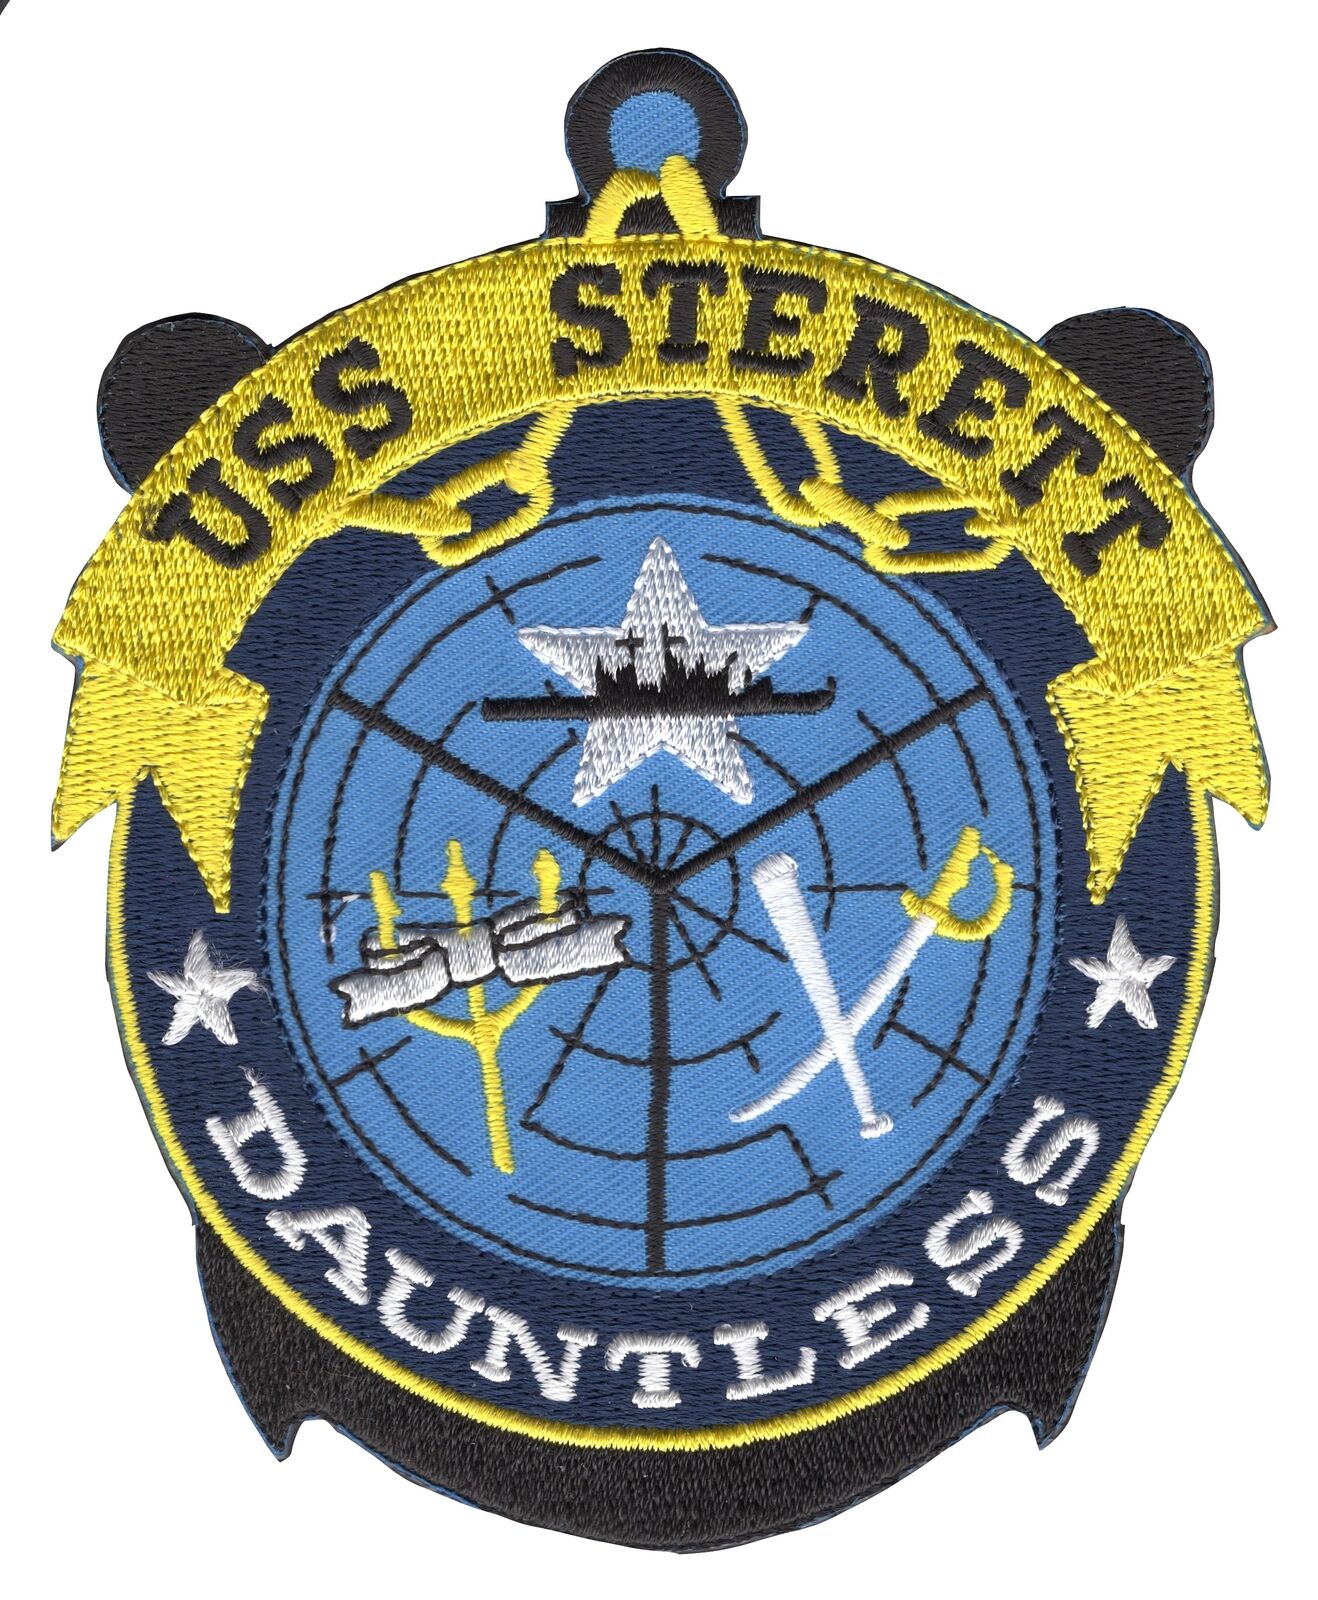 USS Sterett CG-31 Guided Missile Heavy Cruiser Patch